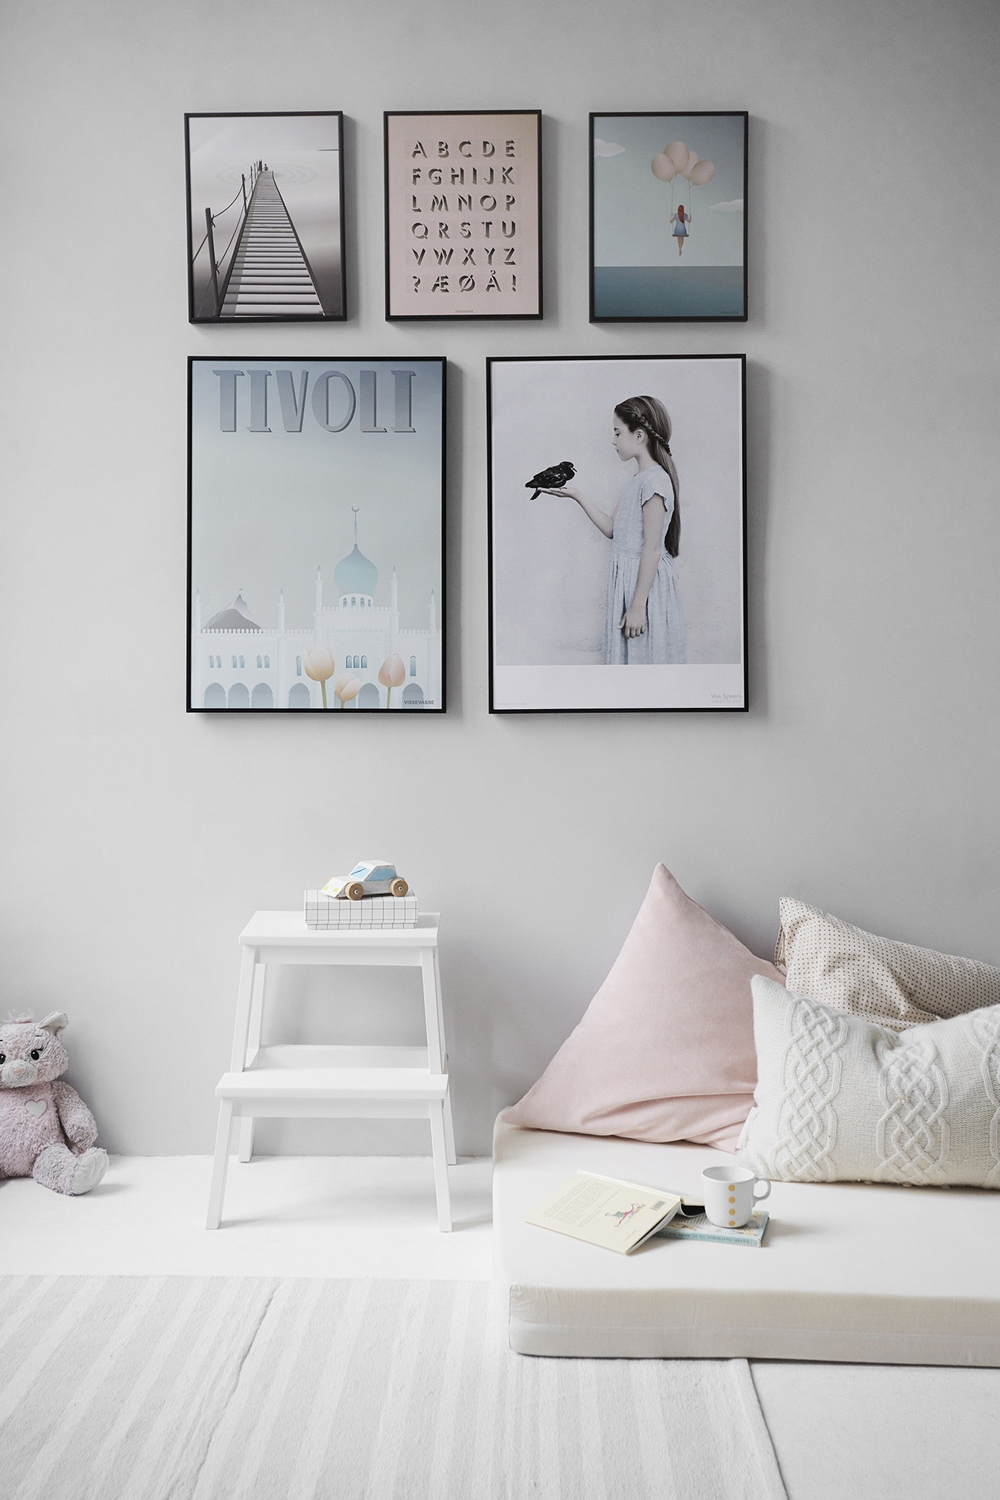 Gallery wall in a child's bedroom